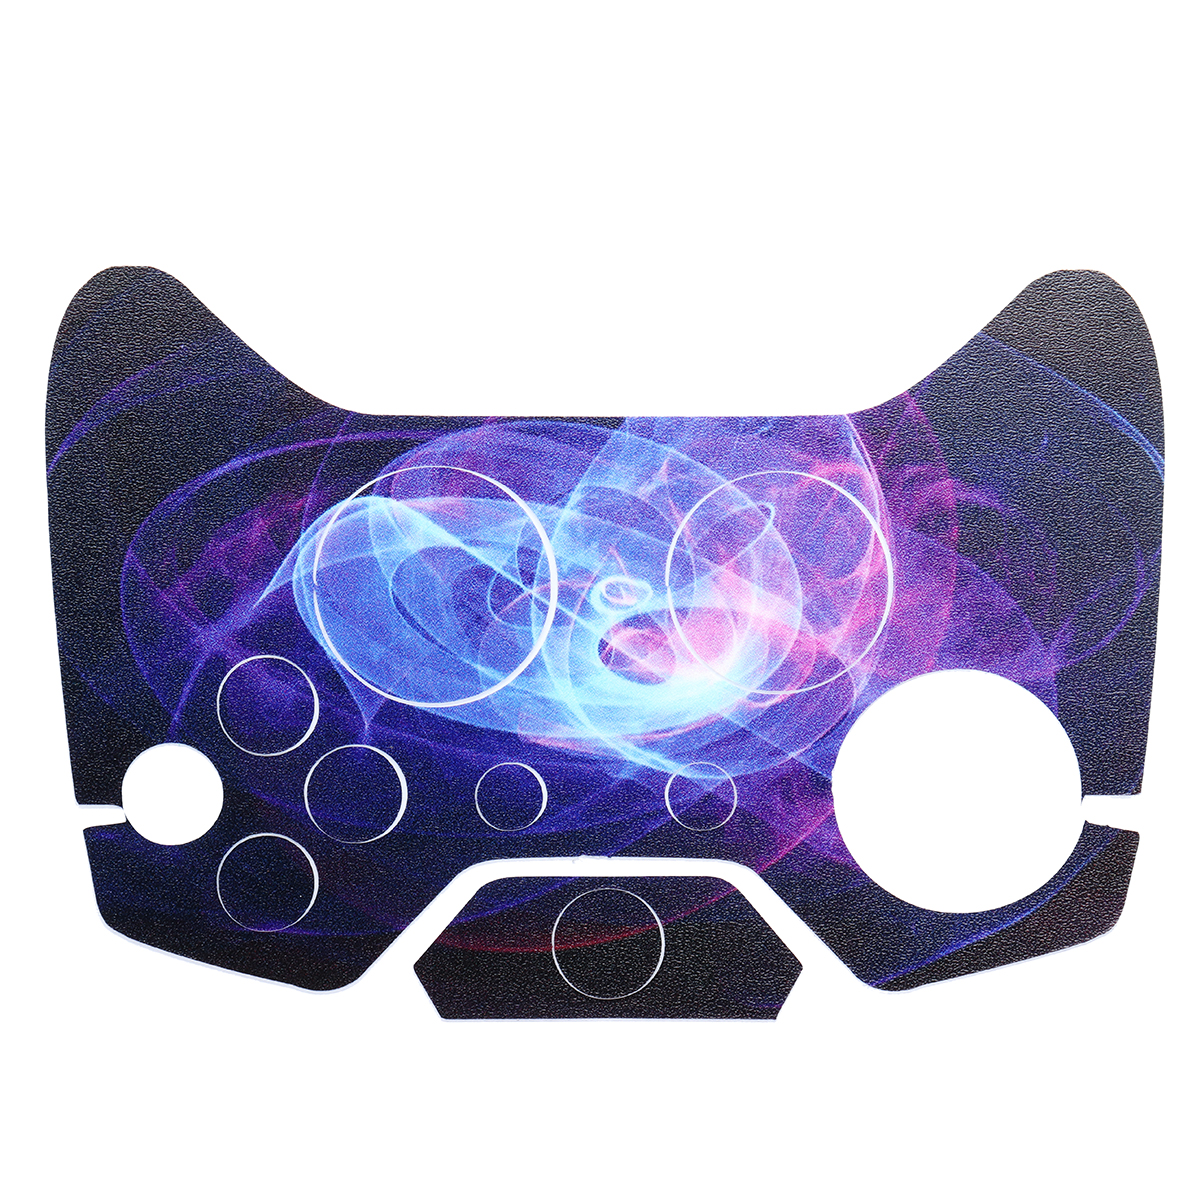 Purple Protective Vinyl Decal Skin Stickers Wrap Cover For Xbox One Game Console Game Controller Kinect 31